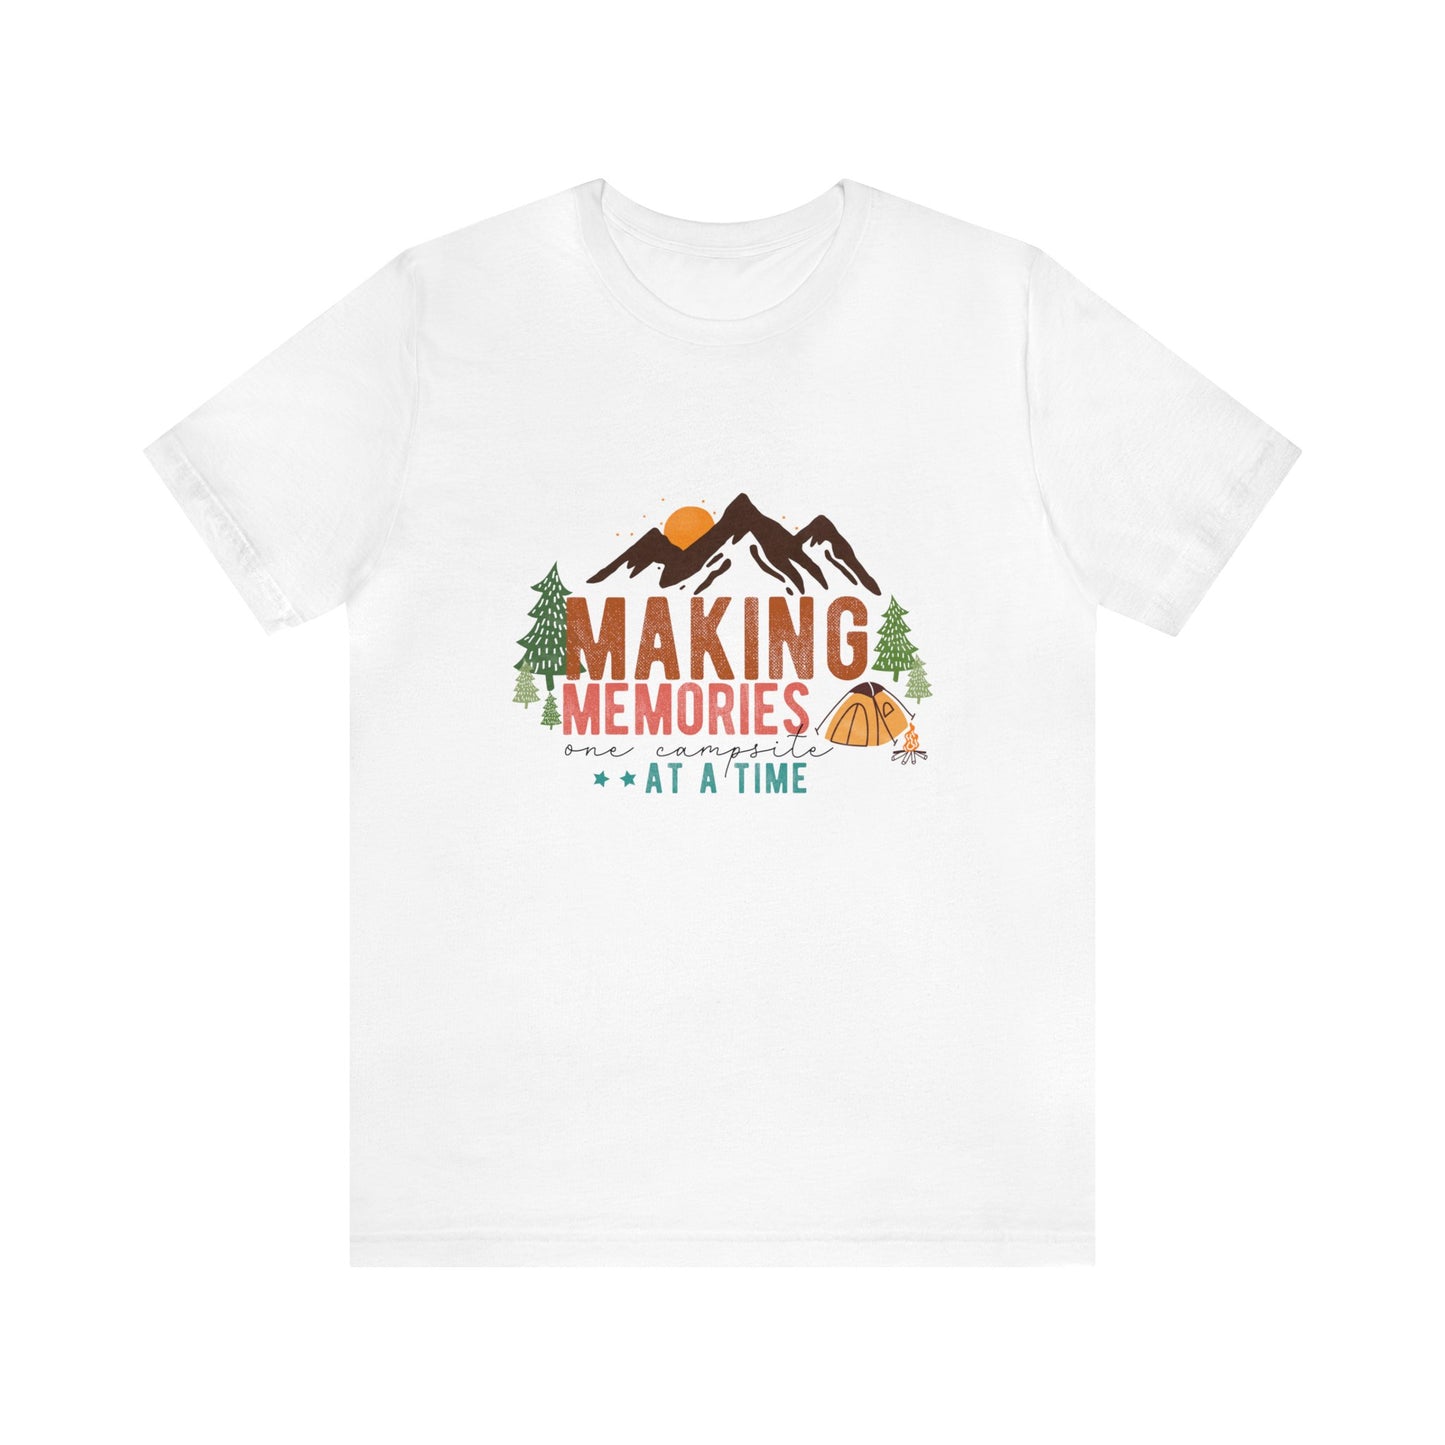 Making memories one campsite at a time Adult Camping Tshirt